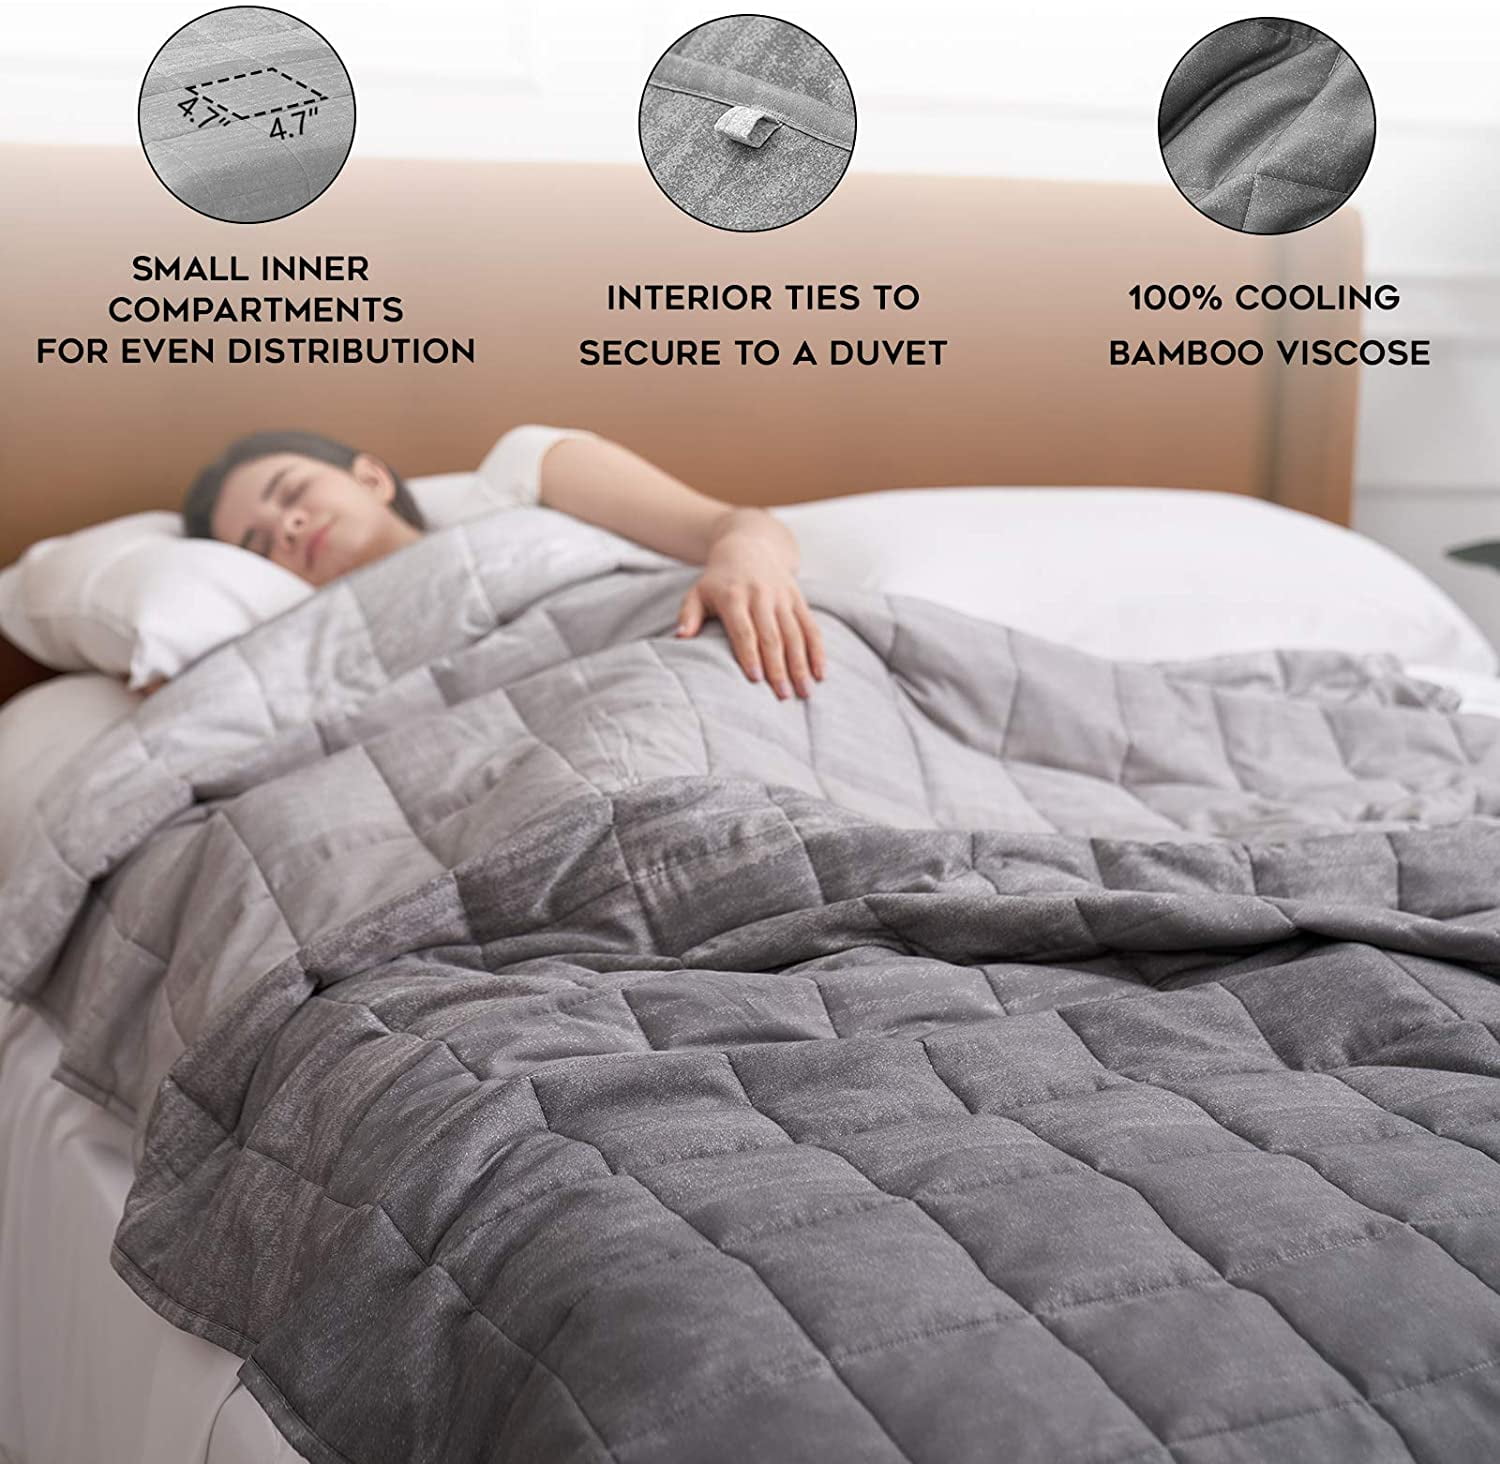 A Duvet Included White, 80x87 25lbs YnM Bamboo Weighted Blanket — Cooling Bamboo Oeko-Tex Certified Material with Premium Glass Beads 110~190lb Persons Sharing Use on Queen/King Bed